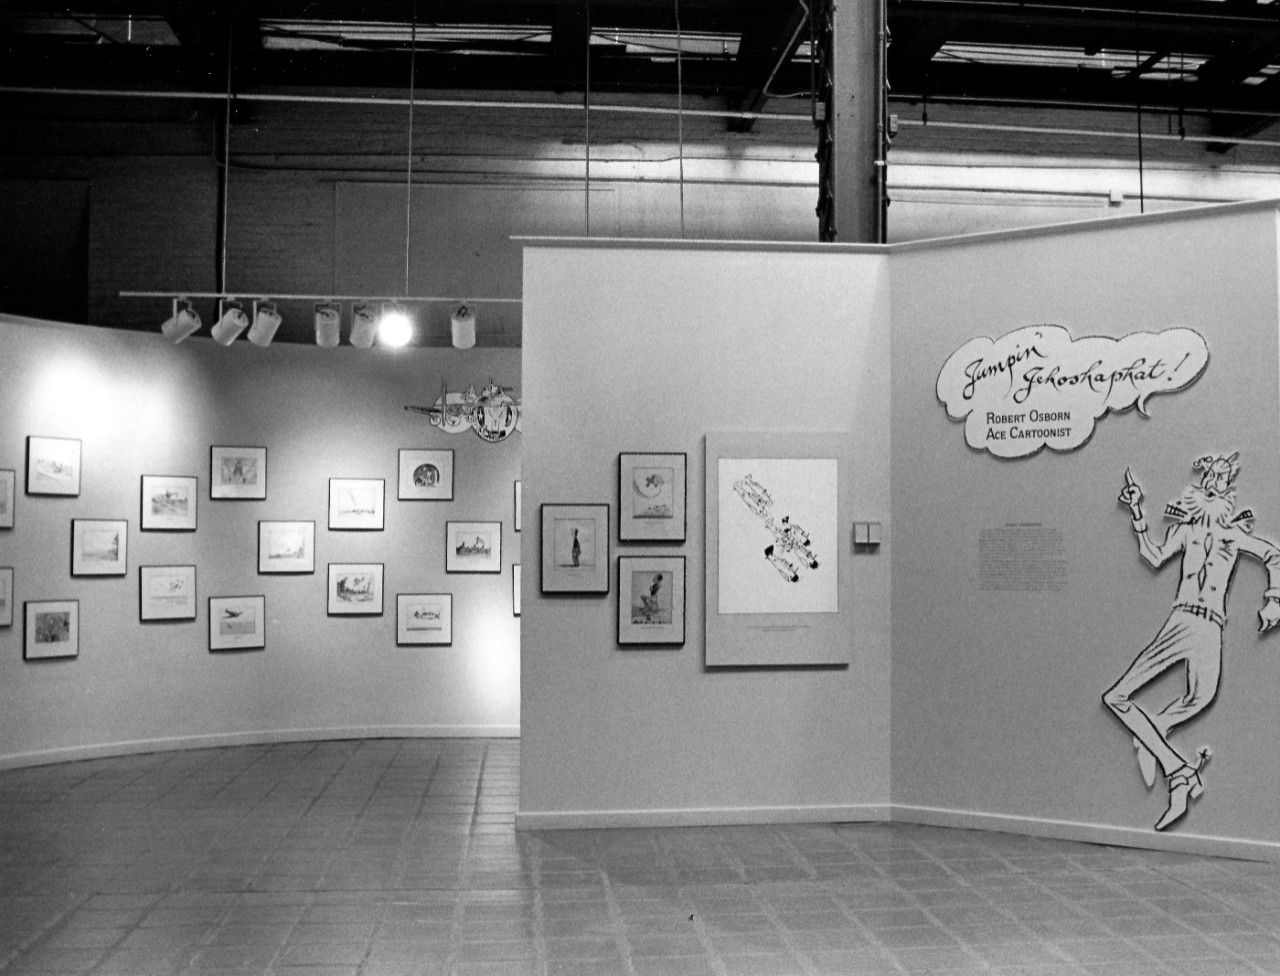 NMUSN-749 Robert Osborn Art Exhibit, 1991. Exhibit focused on the artist’s career with images of Dilbert and Grampaw Pettibone amongst others. National Museum of the U.S. Navy Photograph Collection.